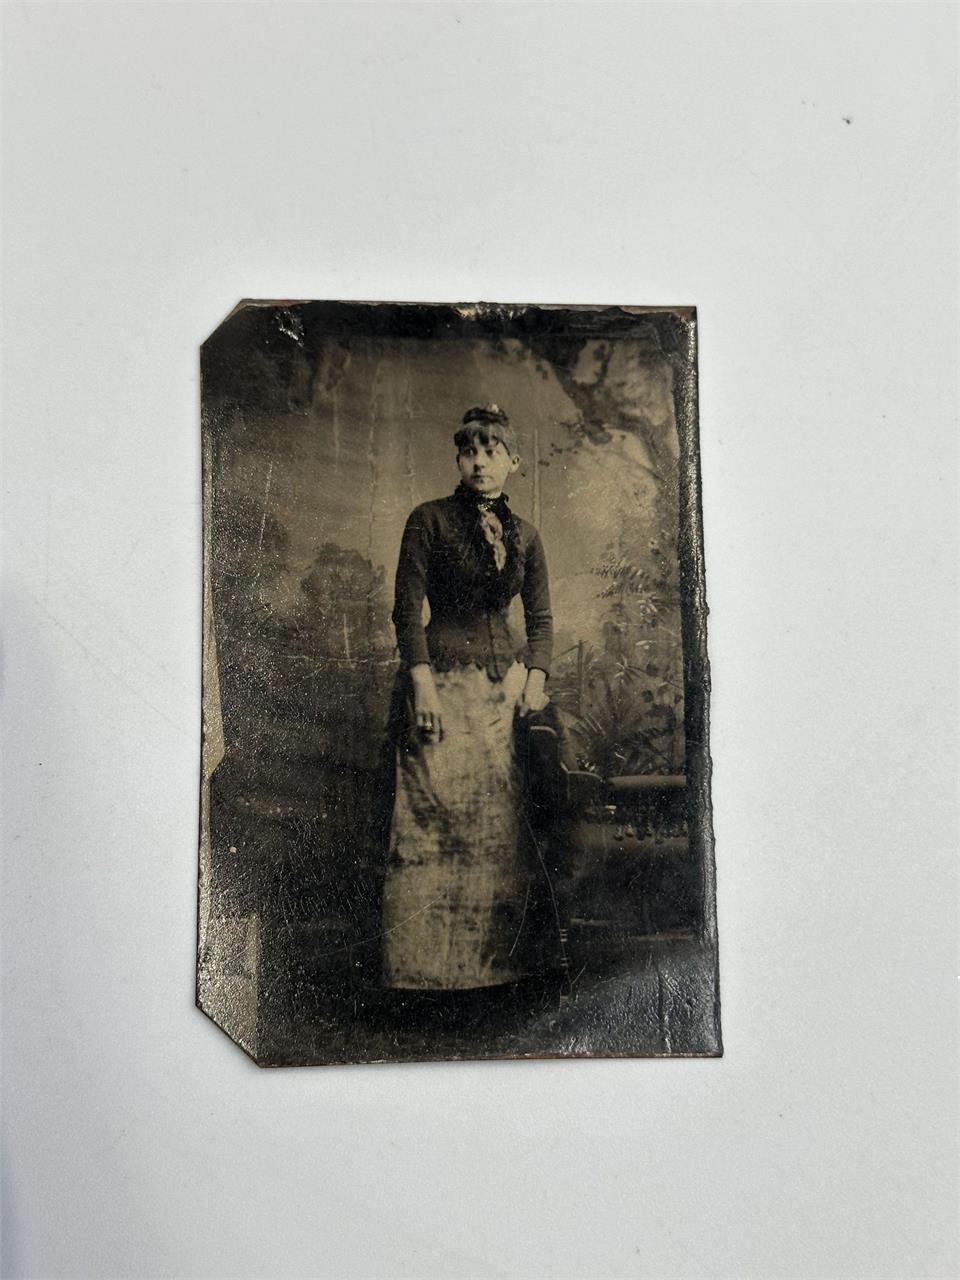  Ambrotype, Antiques, collectibles, glassware, vintage photo